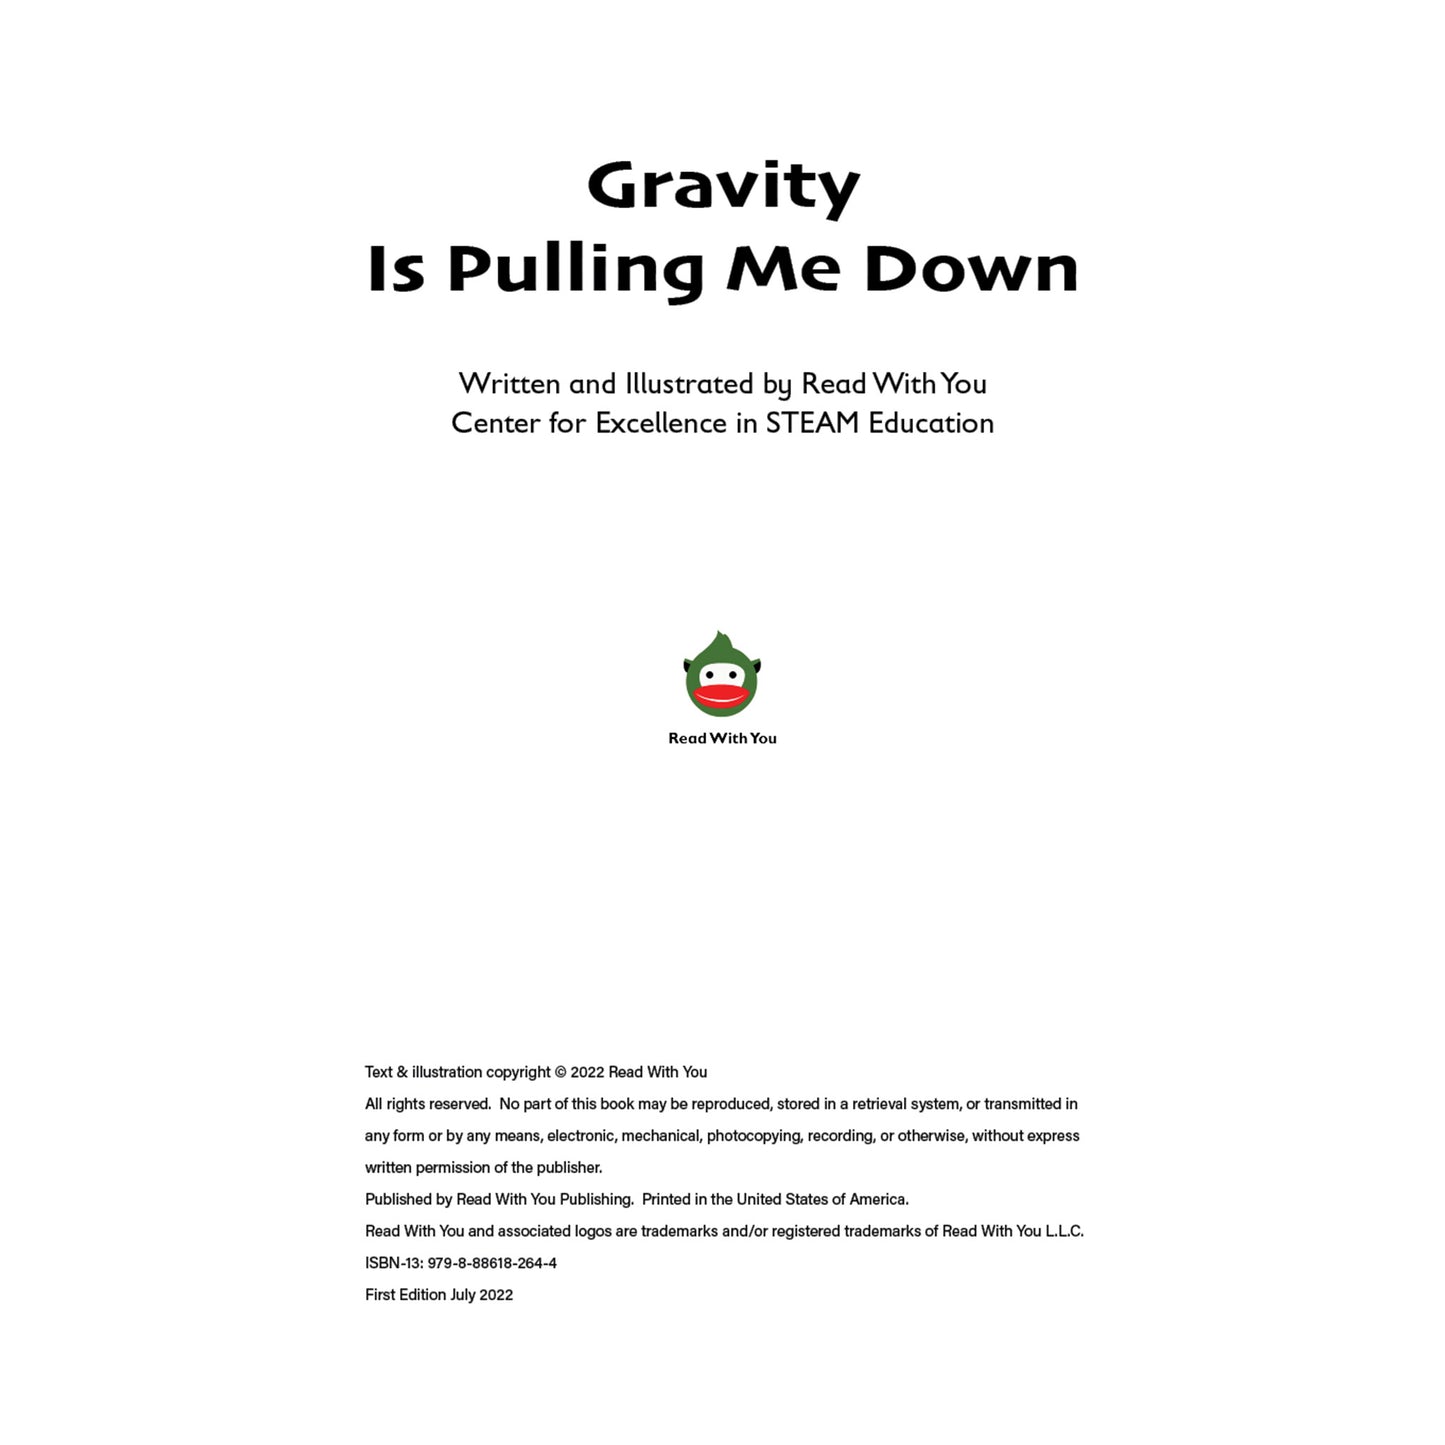 Gravity is Pulling Me Down